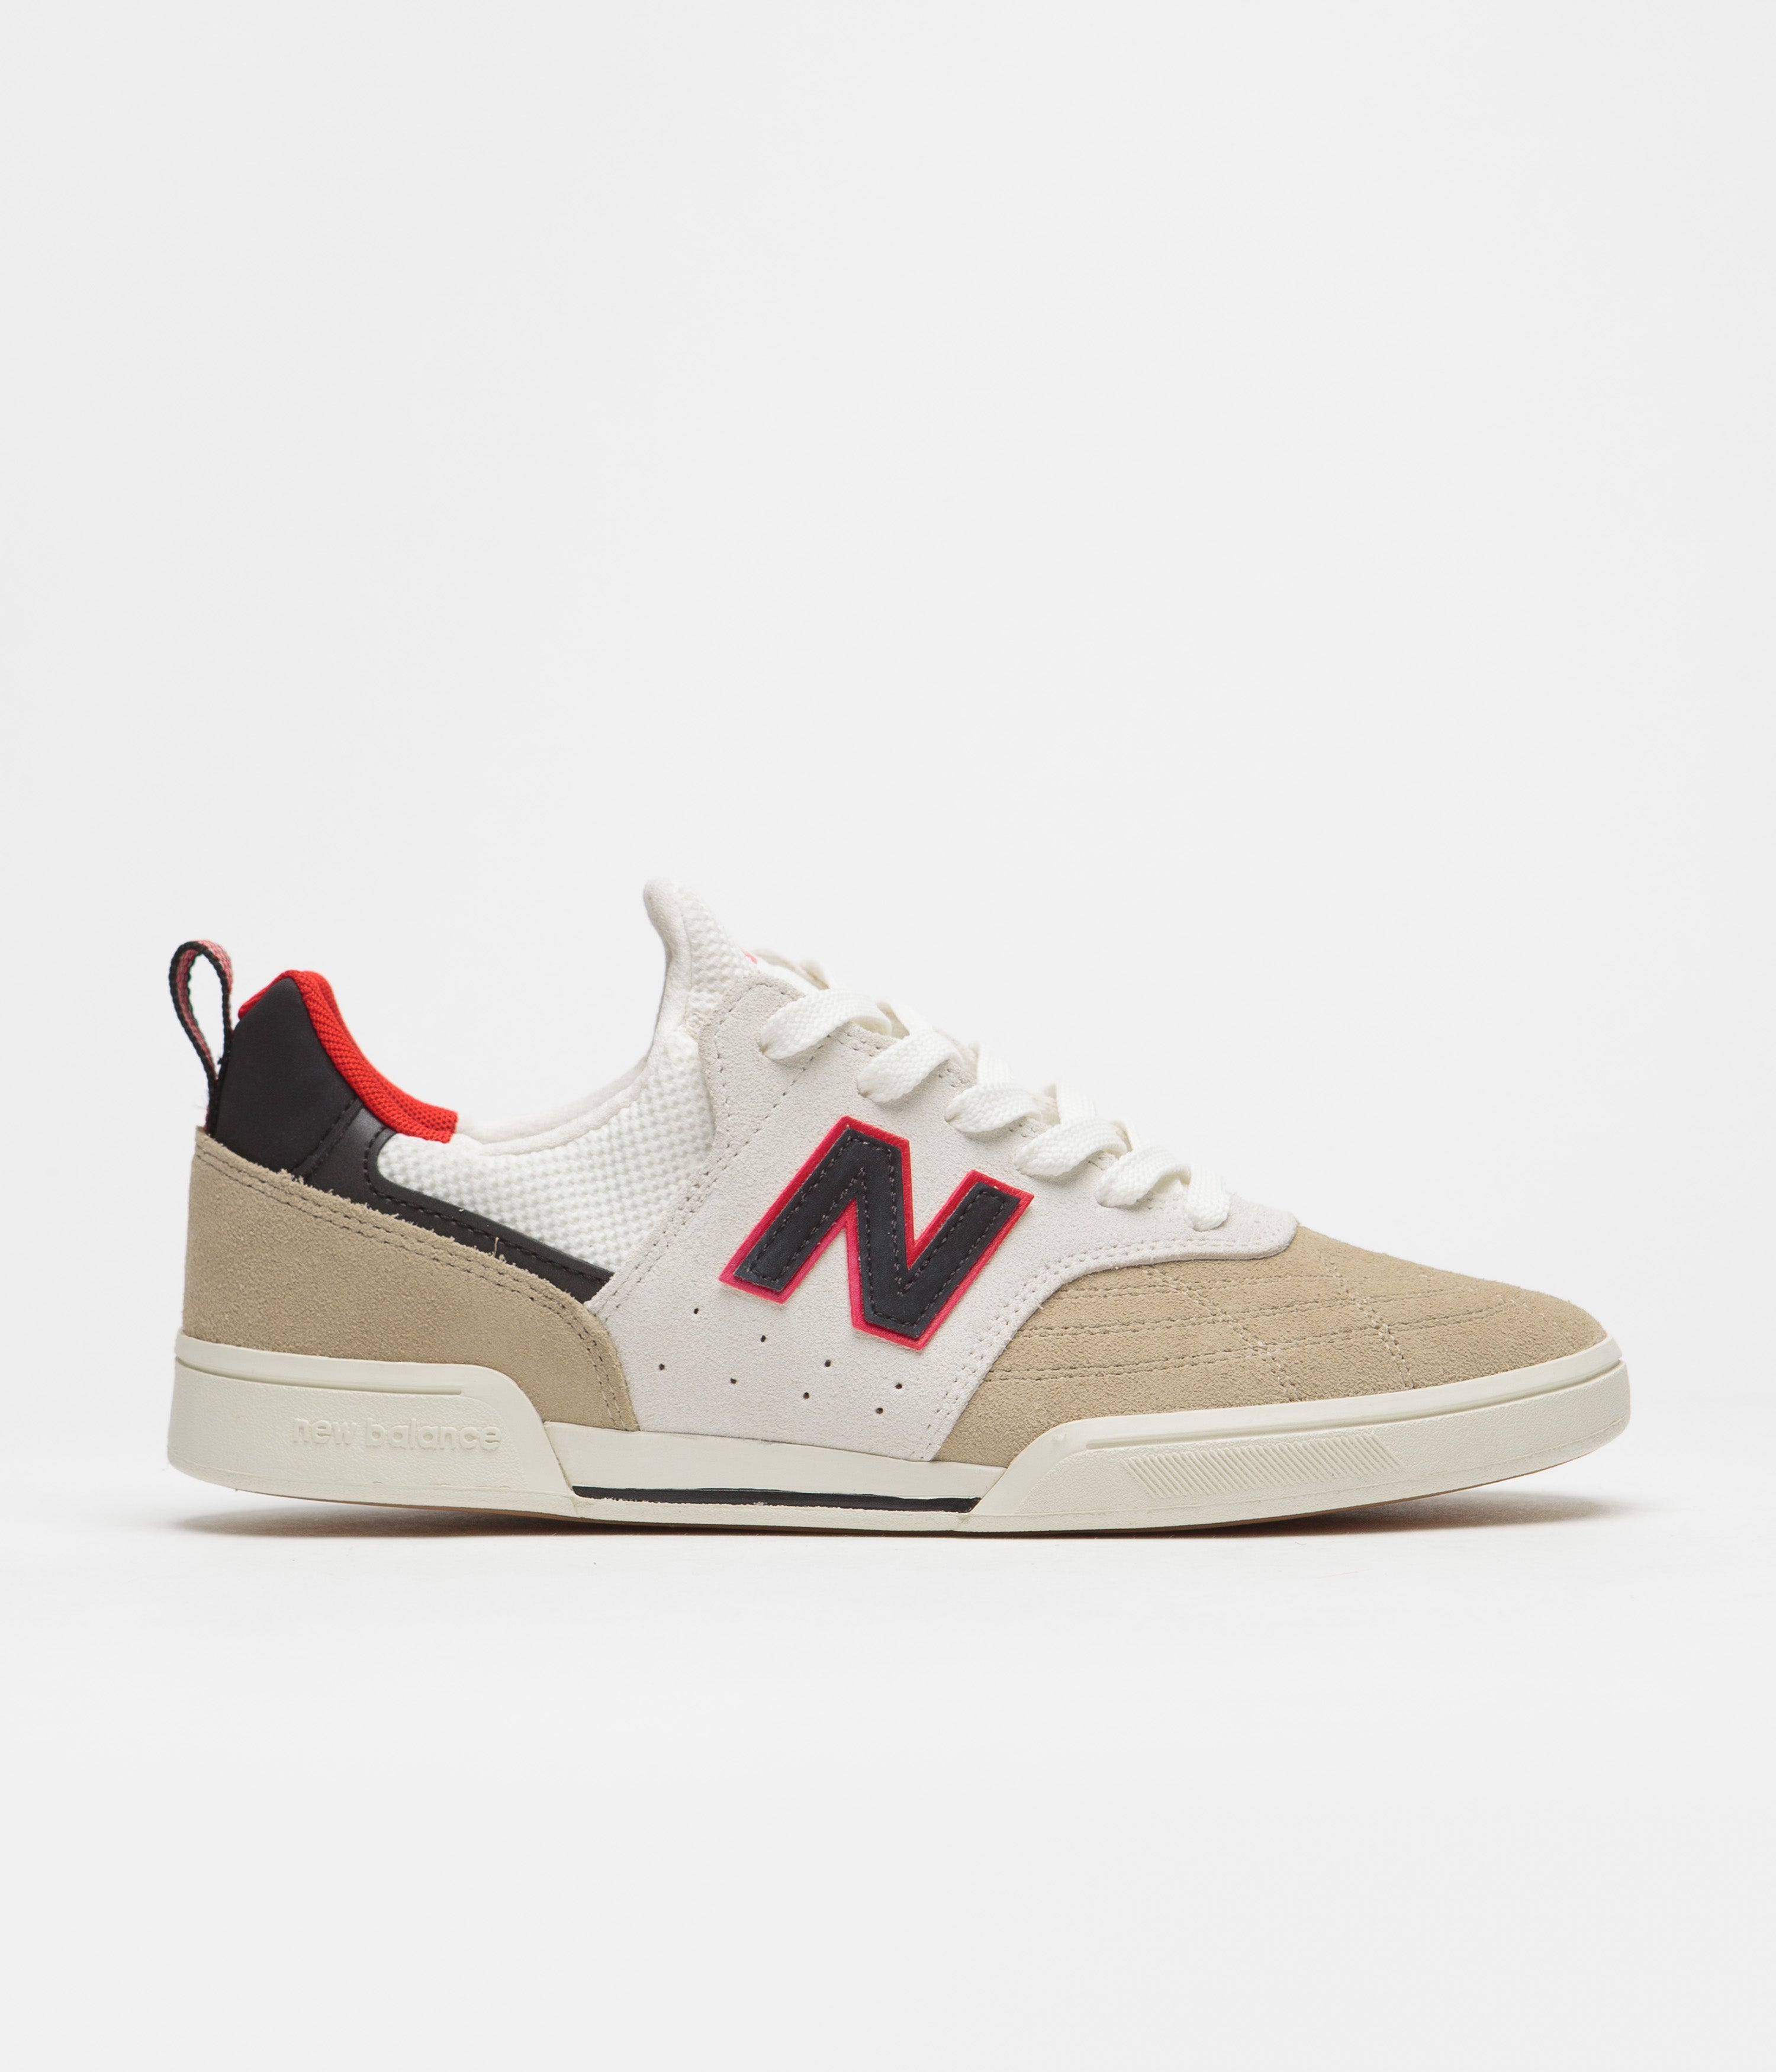 New Balance Numeric | Spend £85, Get Free Next Day Delivery | Flatspot